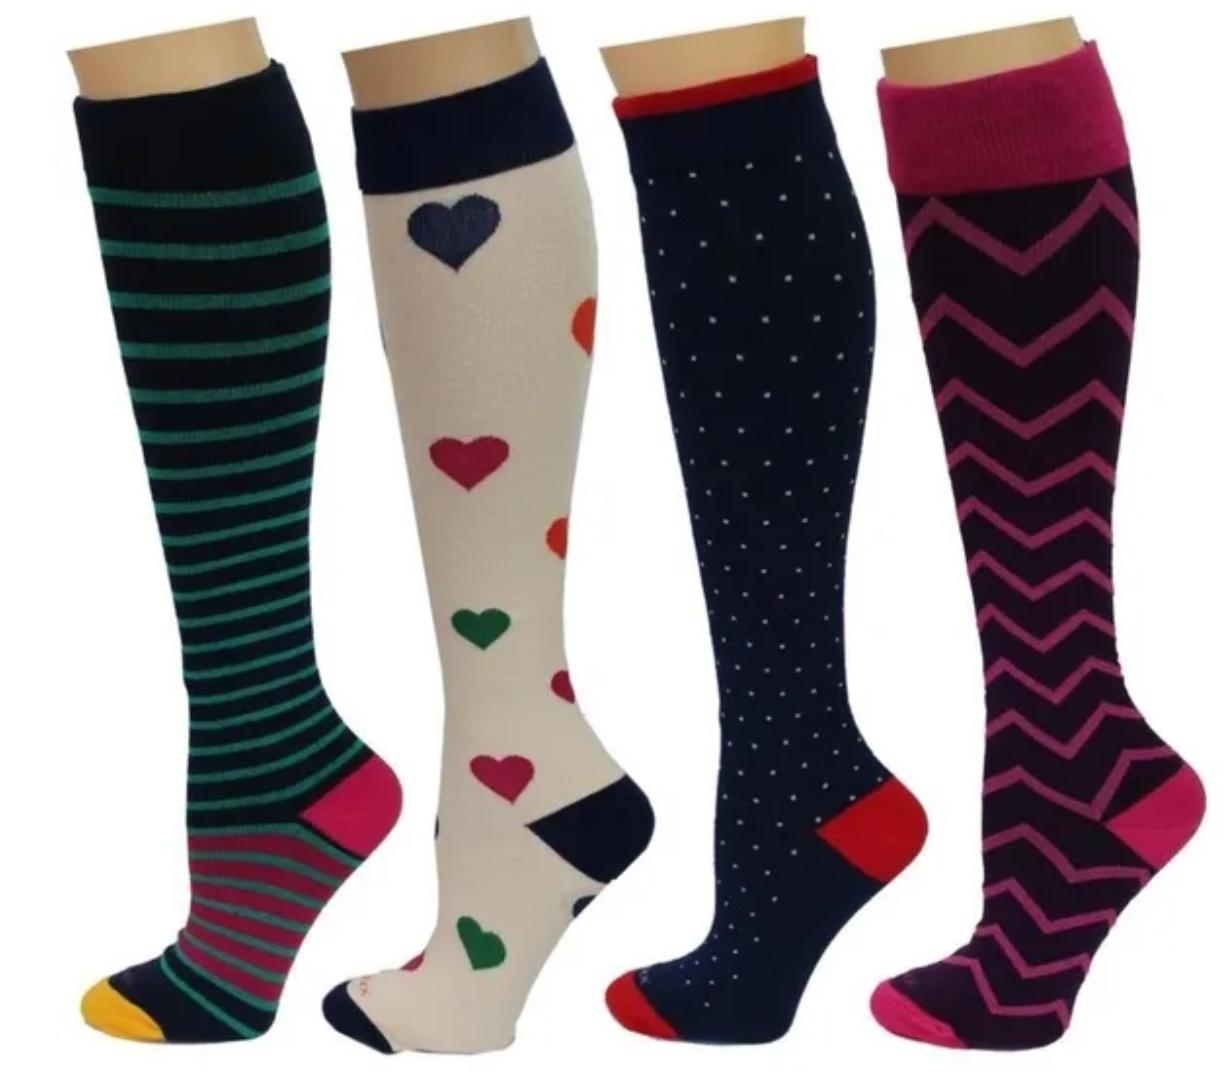 Support Knee Highs - How to Choose (and When to Wear!)